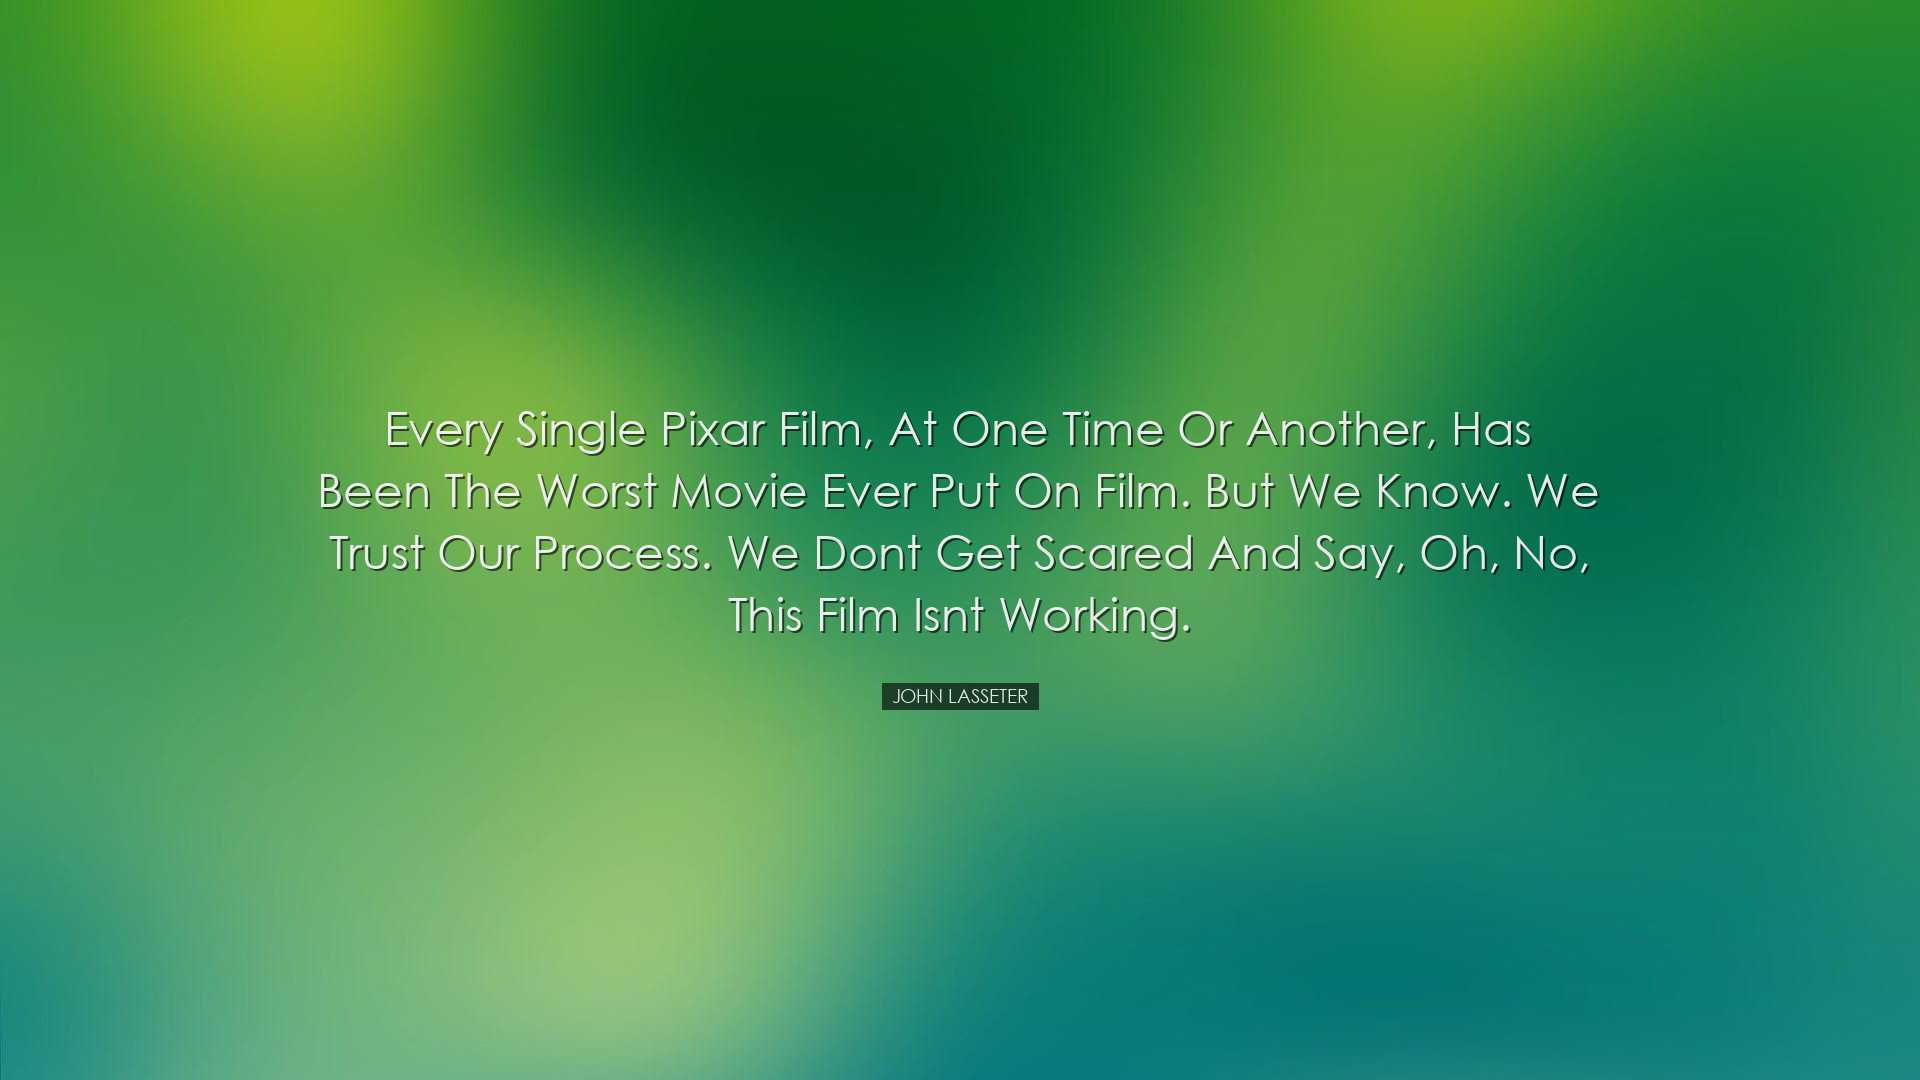 Every single Pixar film, at one time or another, has been the wors